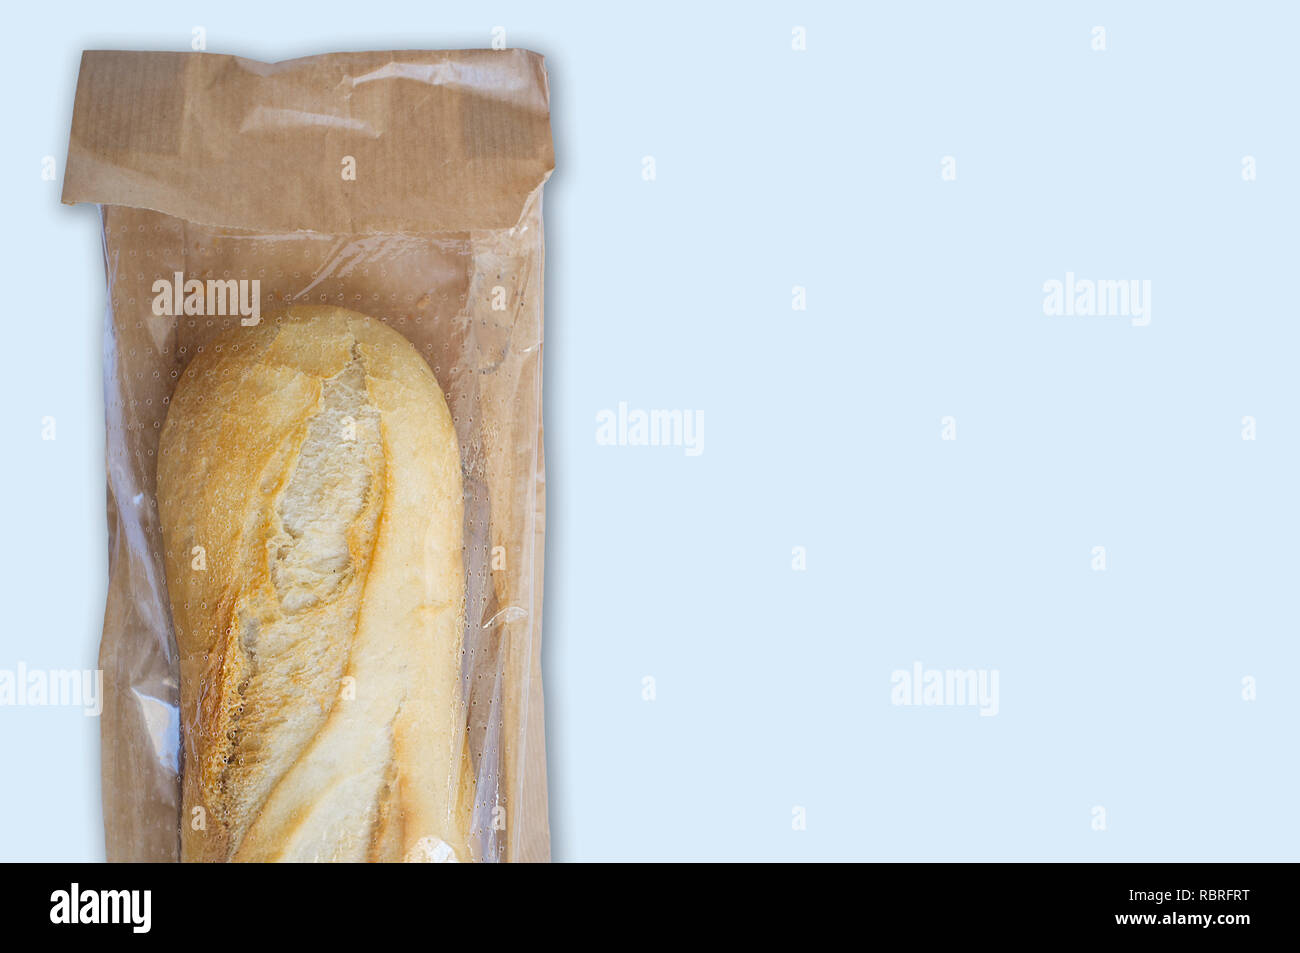 https://c8.alamy.com/comp/RBRFRT/baguette-bread-in-plastic-lined-paper-bag-with-clear-window-isolated-over-white-RBRFRT.jpg